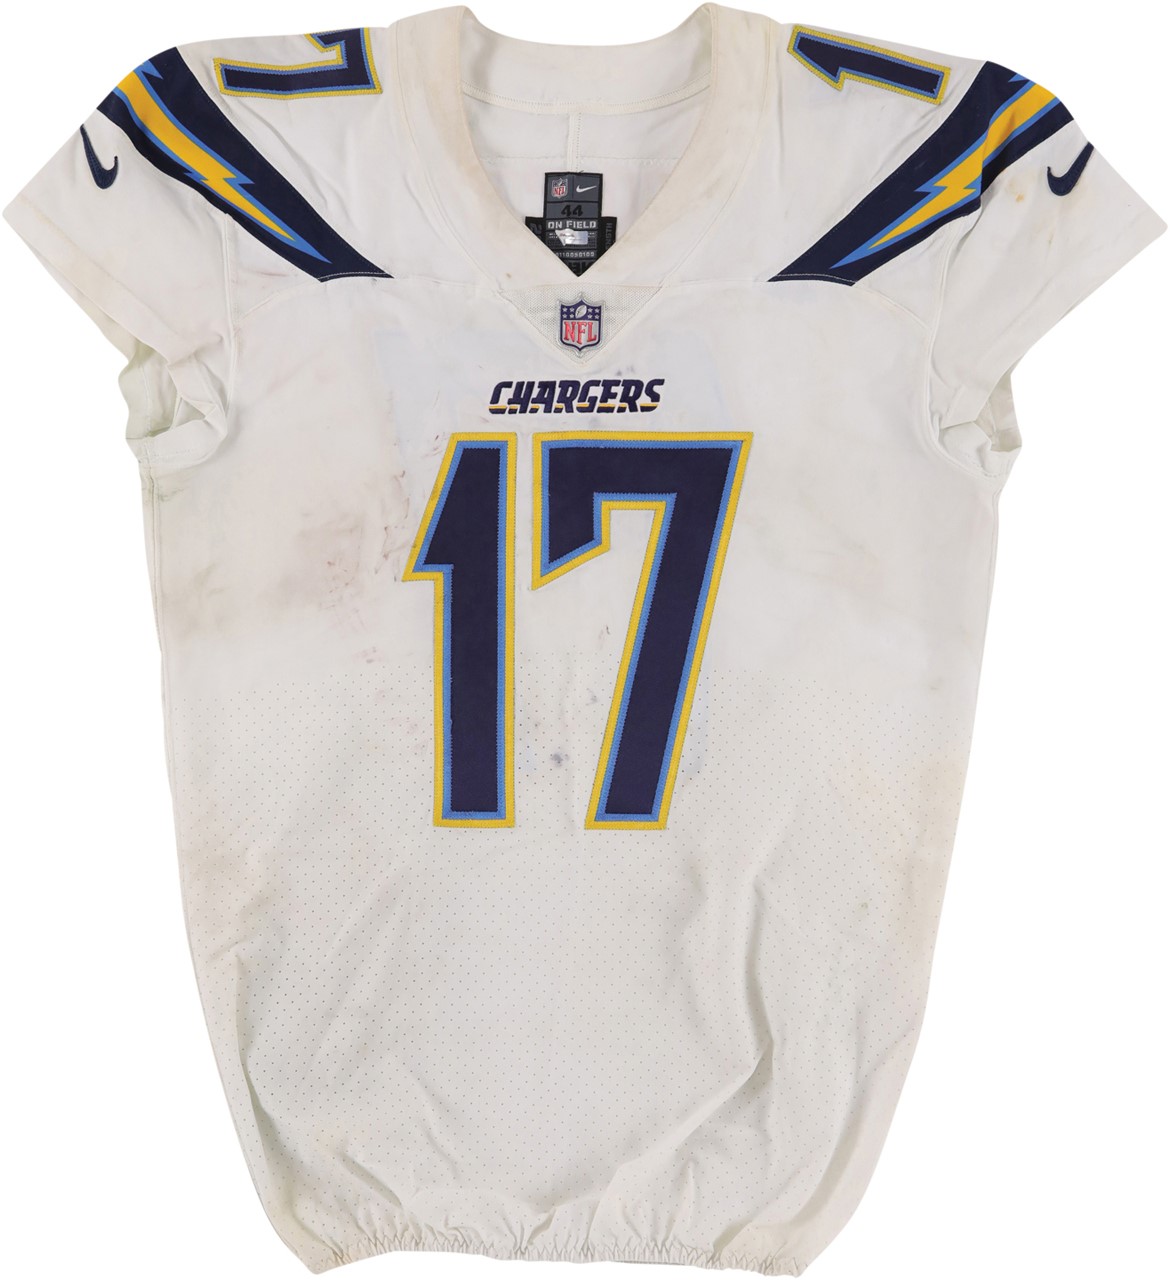 Football - 2017 Philip Rivers San Diego Chargers Game Worn Jersey - Photo-Matched to Two Games (Photo-Matching LOA & Chargers LOA)